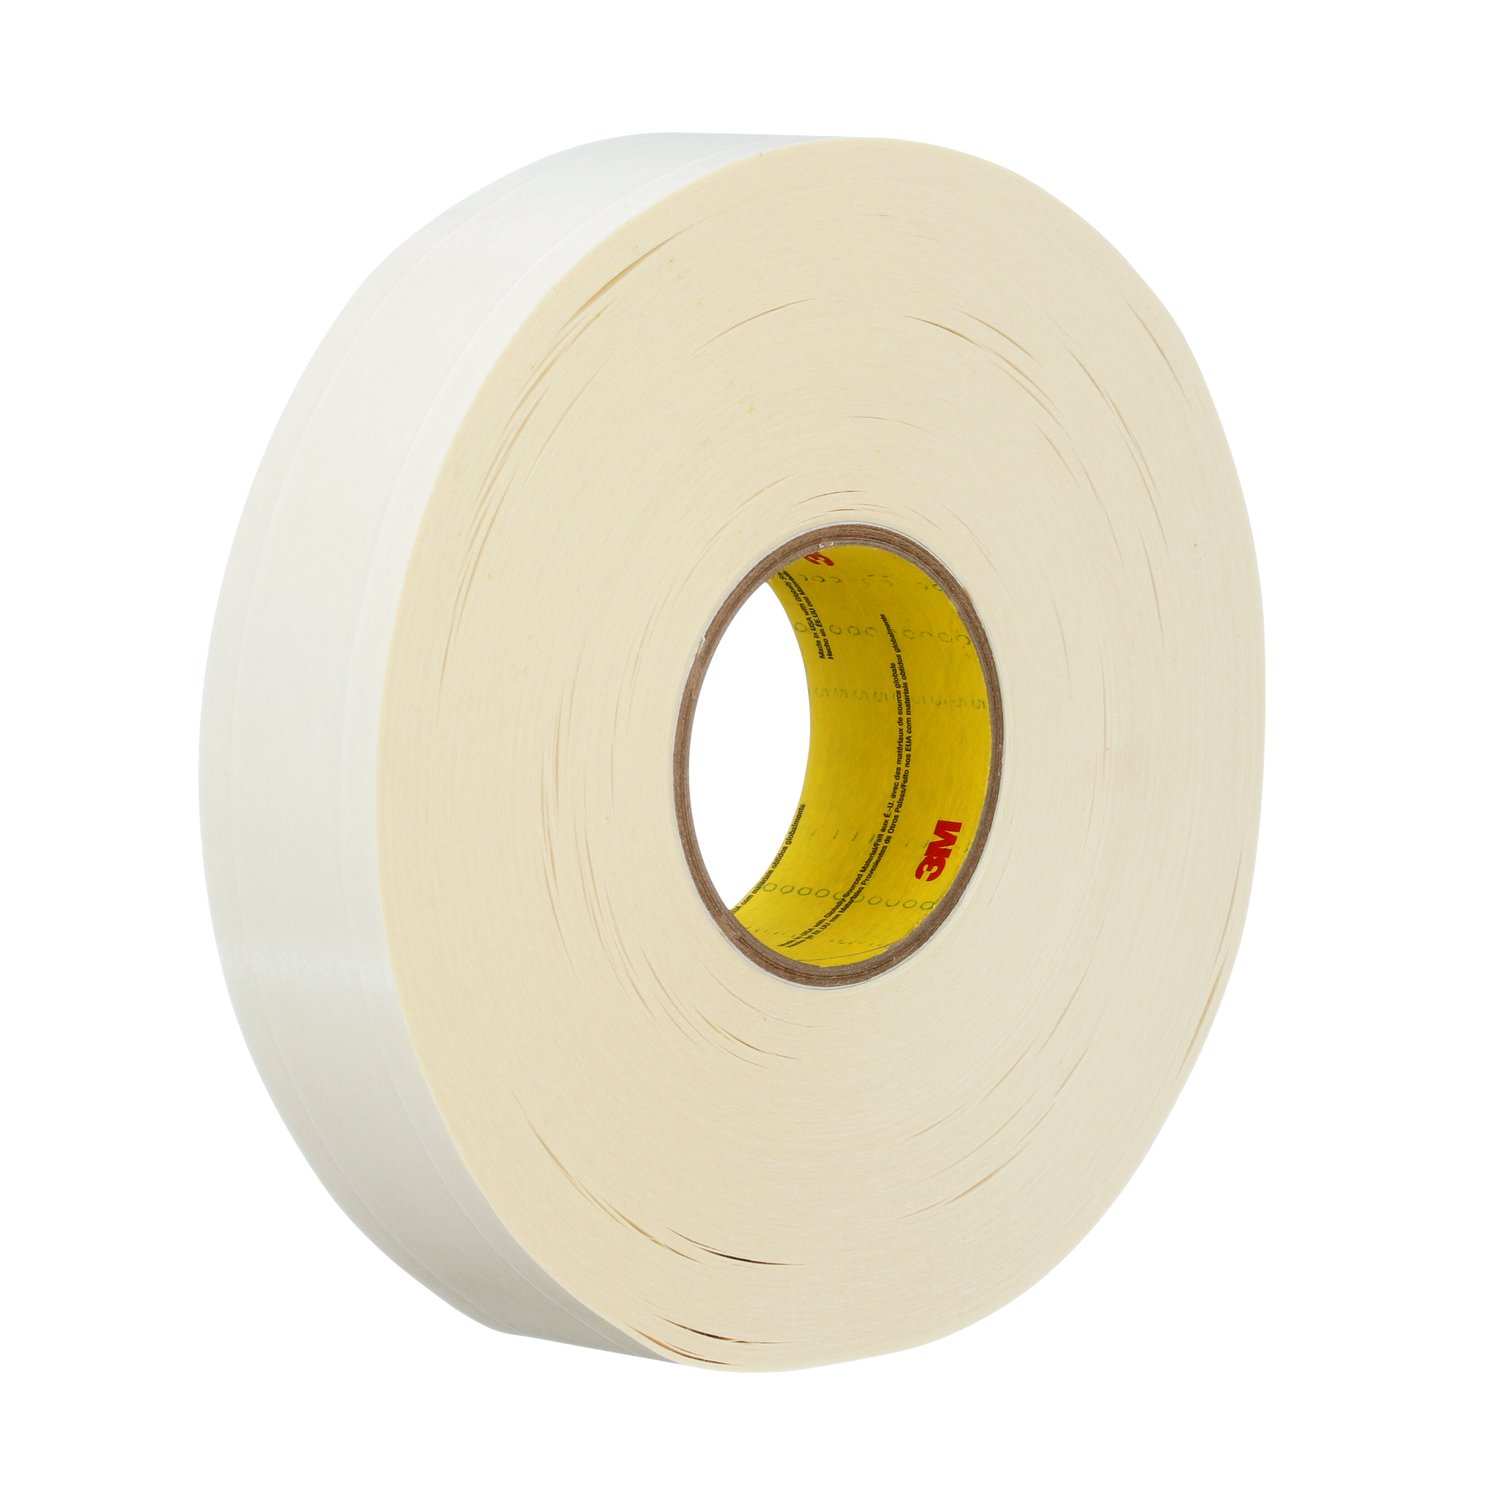 7100028165 - 3M Repulpable Heavy Duty Double Coated Tape R3287, White, 24 mm x 55 m,
5 mil, 36 rolls per case